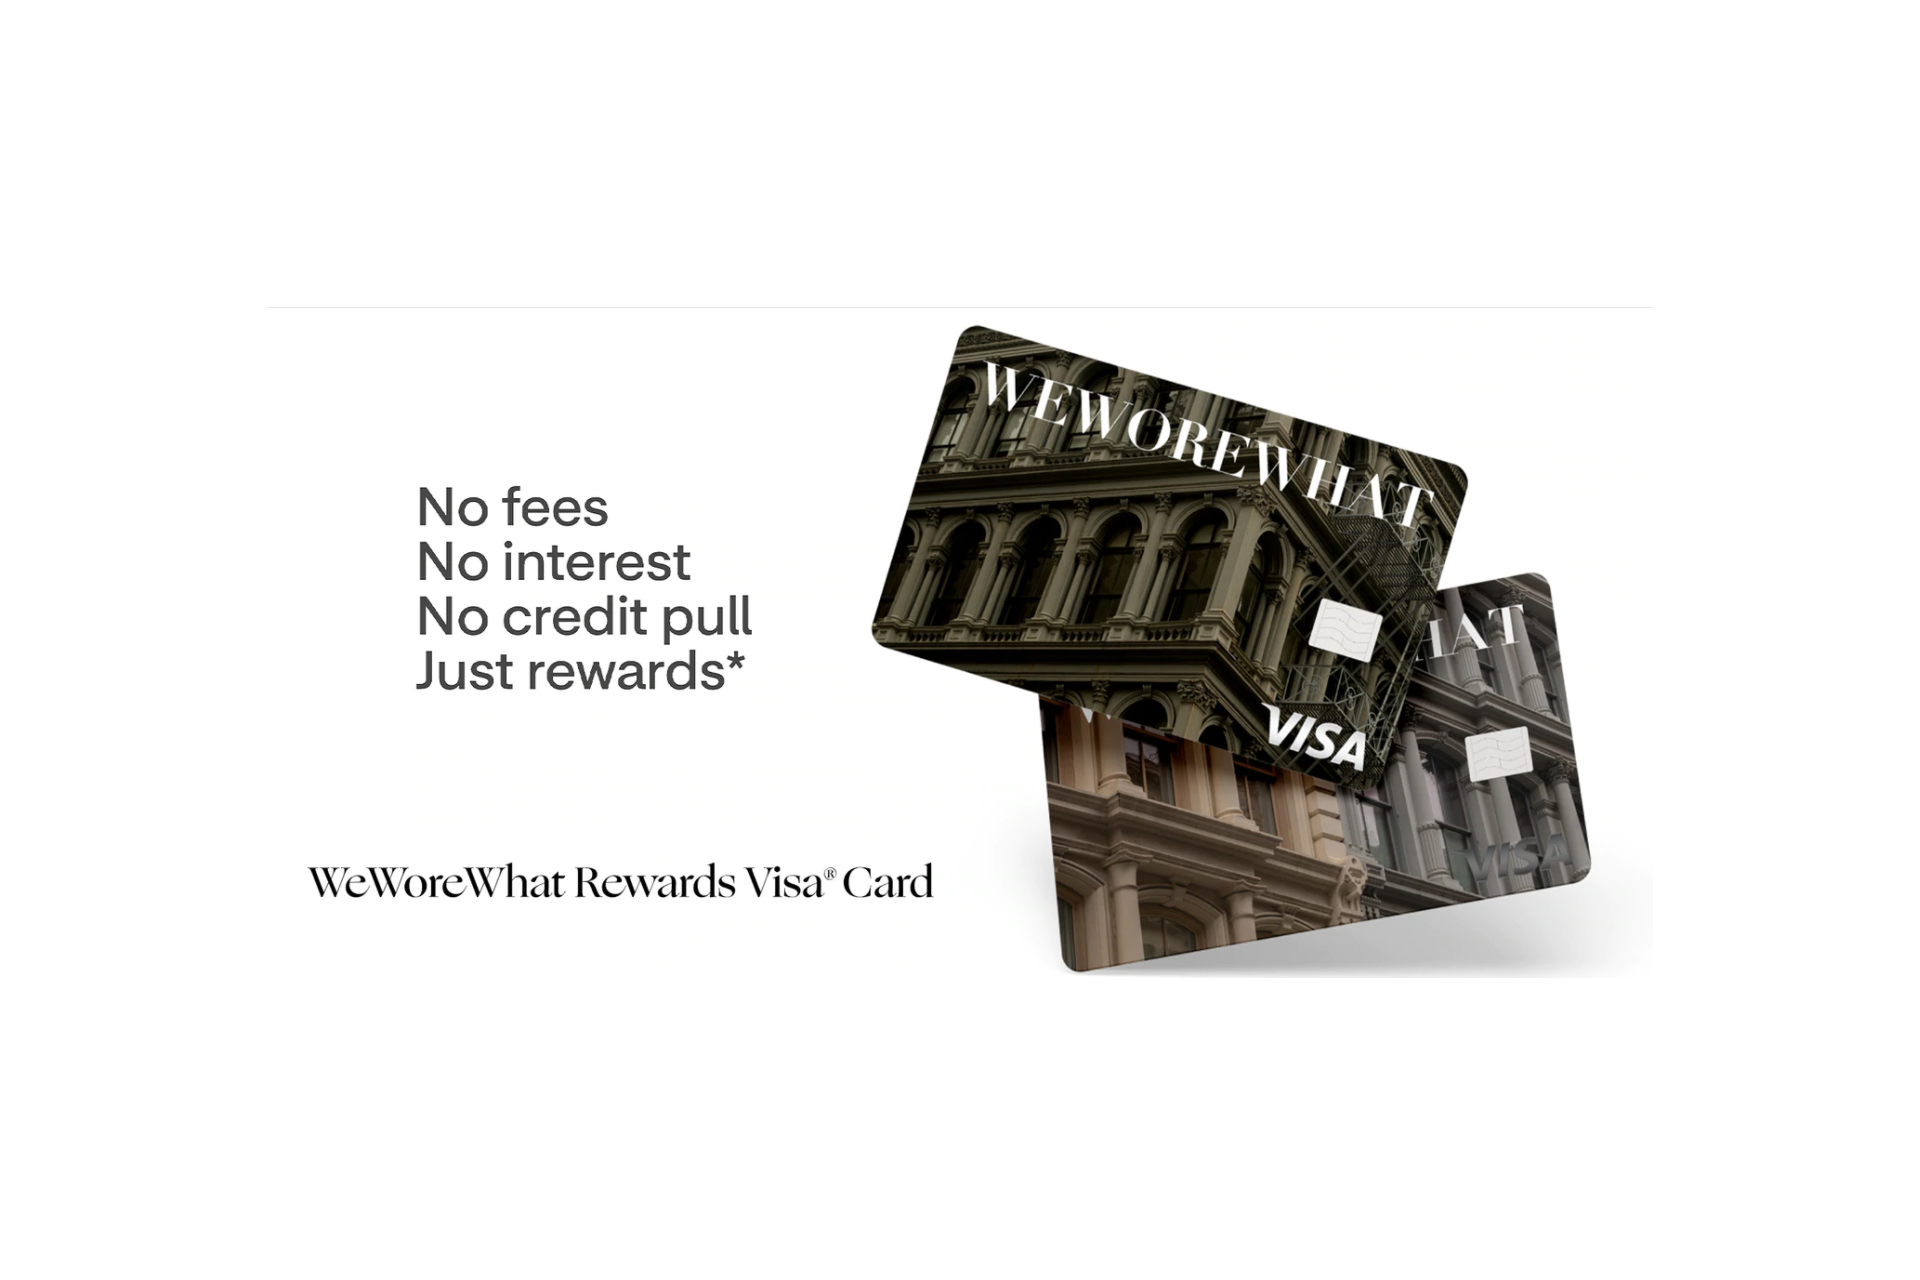 weworewhat-credit-card-offers-creators-up-to-10-back